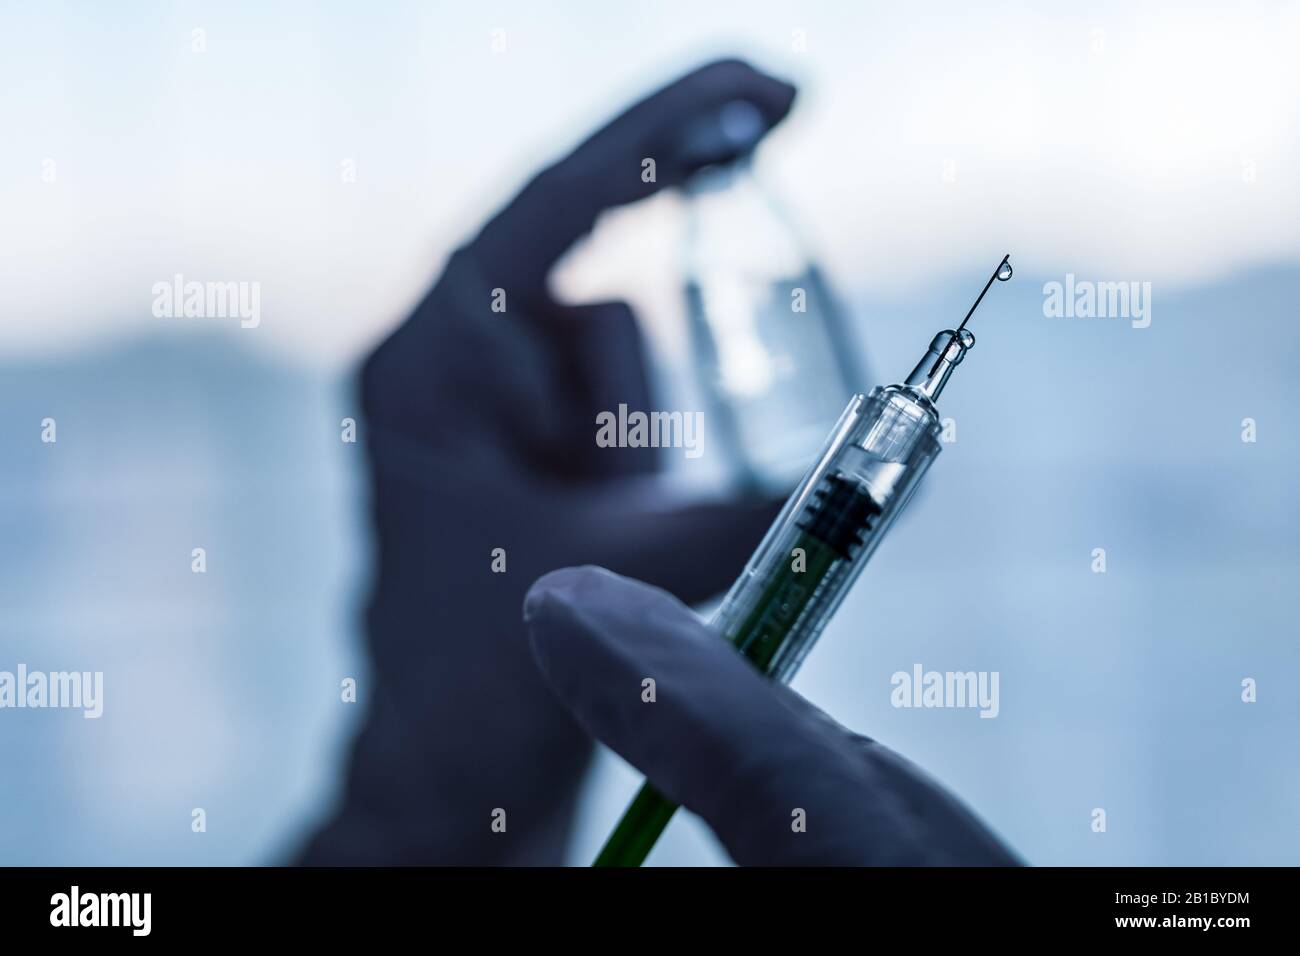 Syringe, medical injection in hand. Vaccination equipment with needle. Stock Photo